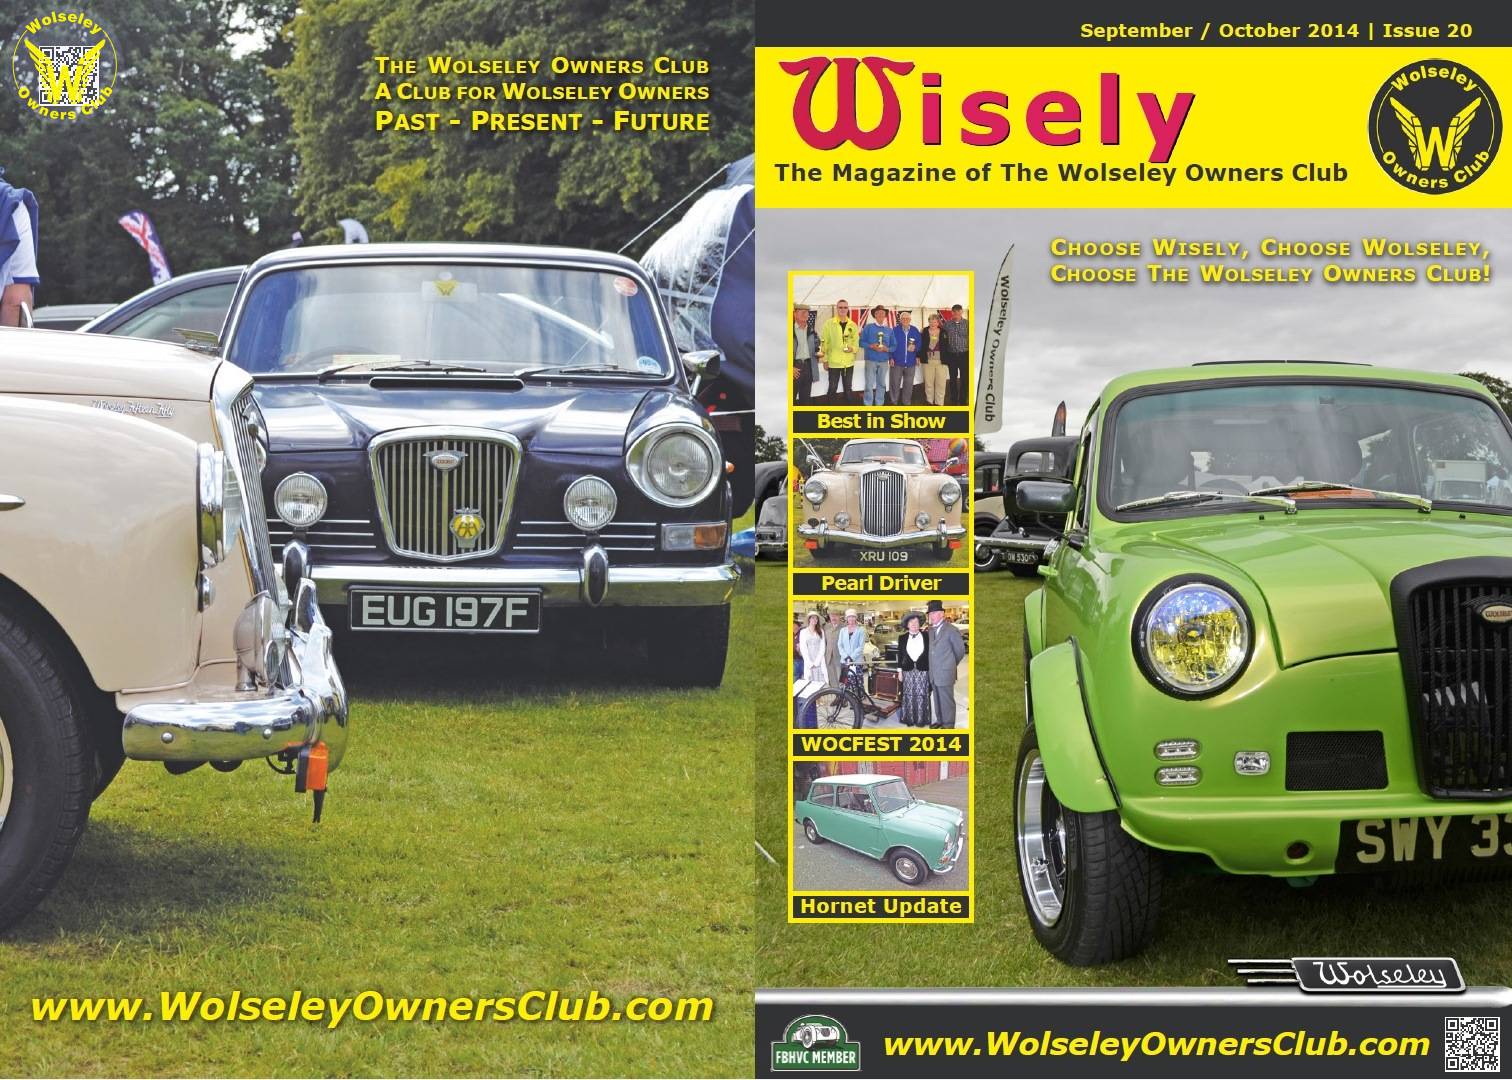 Wisely Issue 20